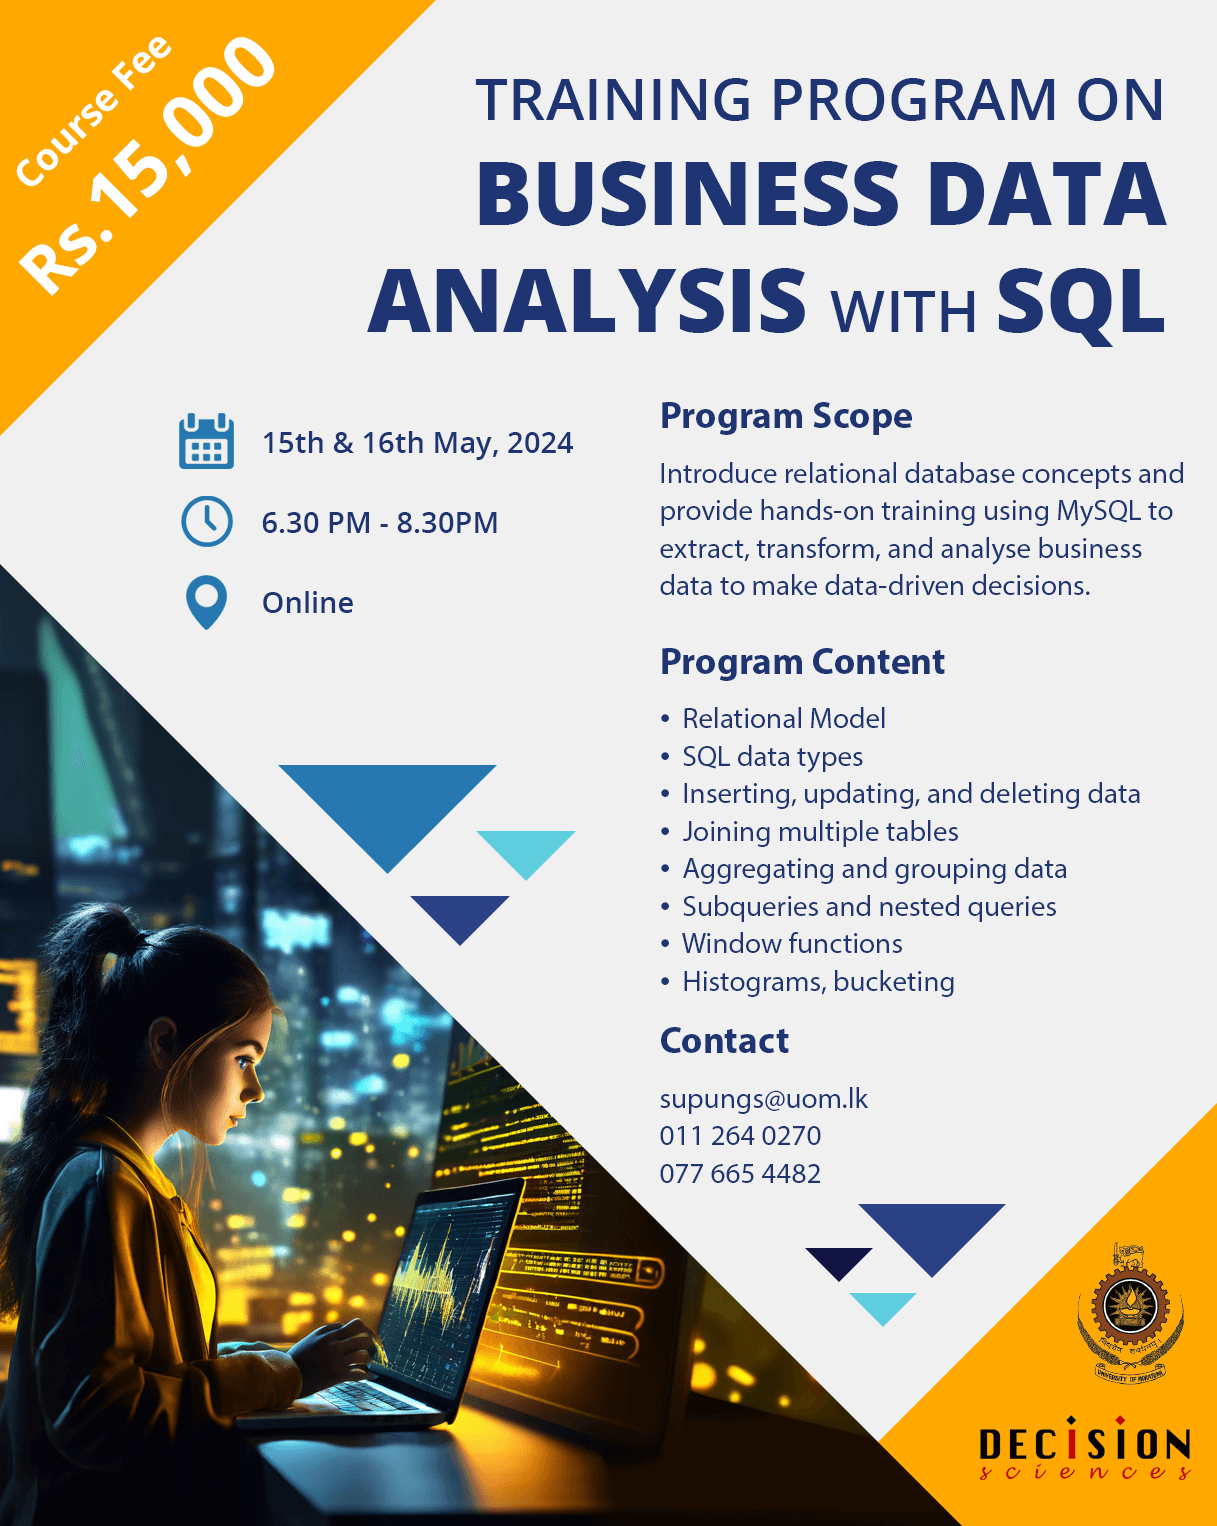 Data analysis with SQL